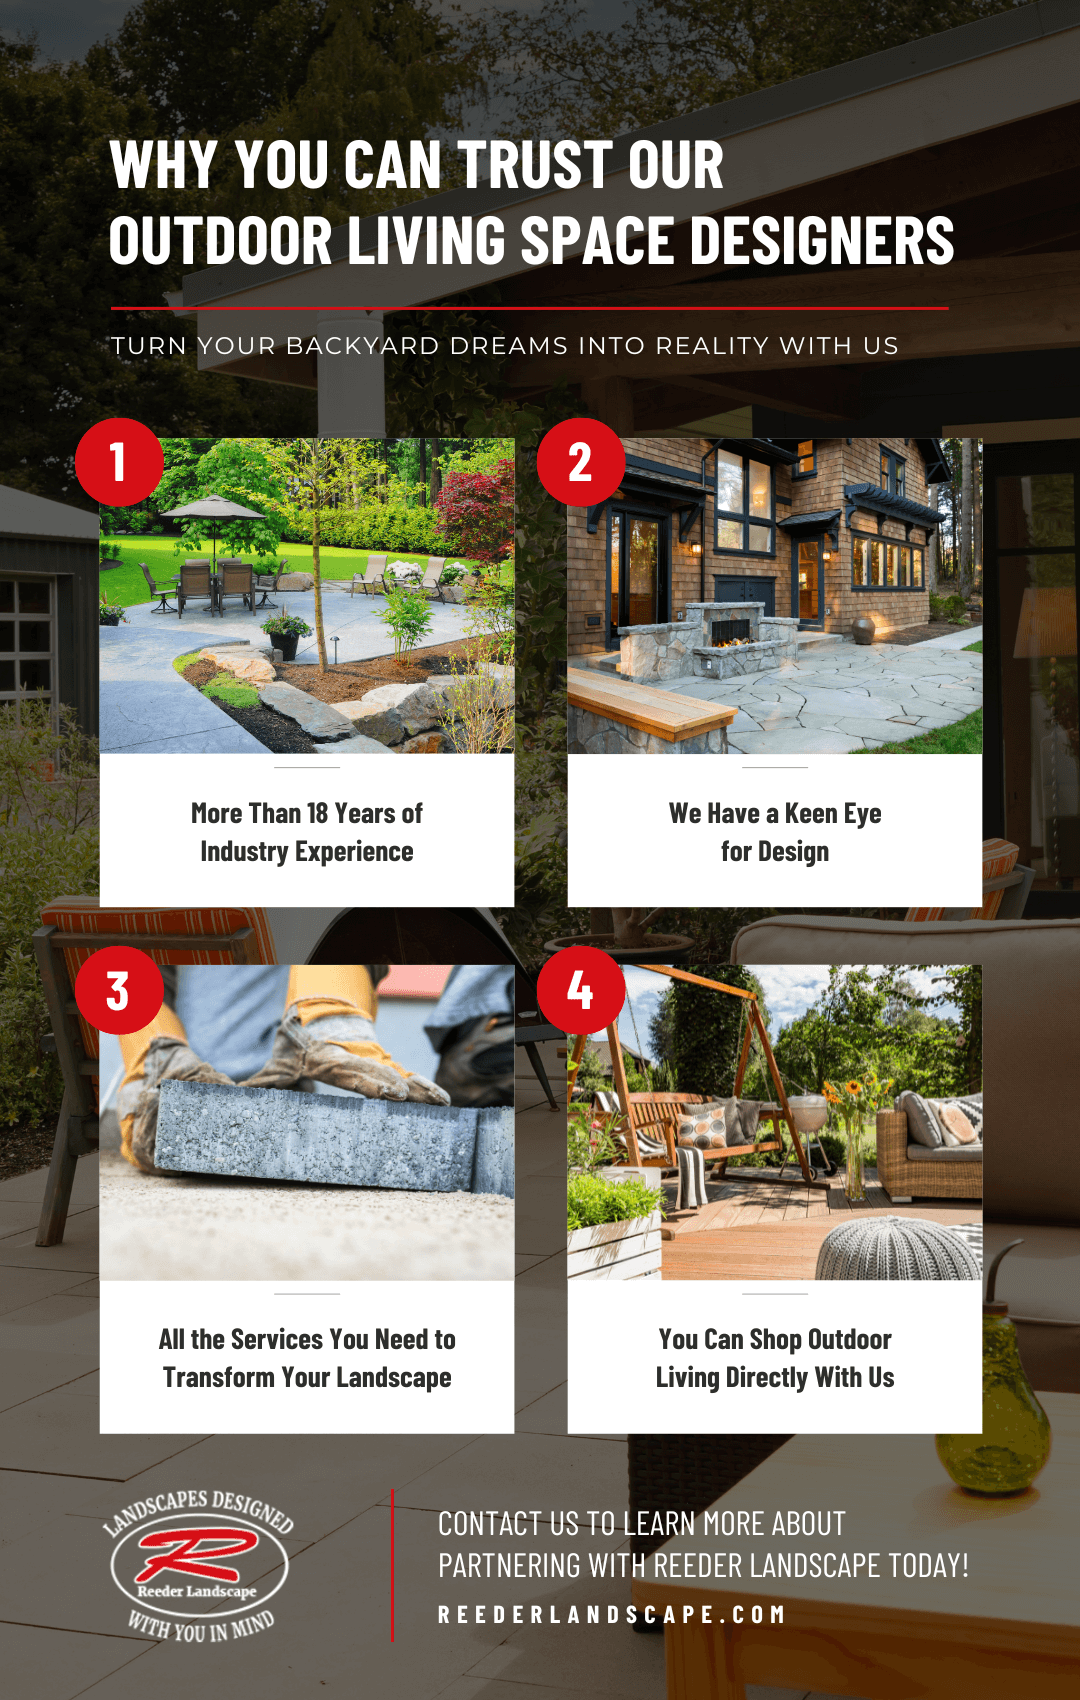 Why You Can Trust Our Outdoor Living Space Designers